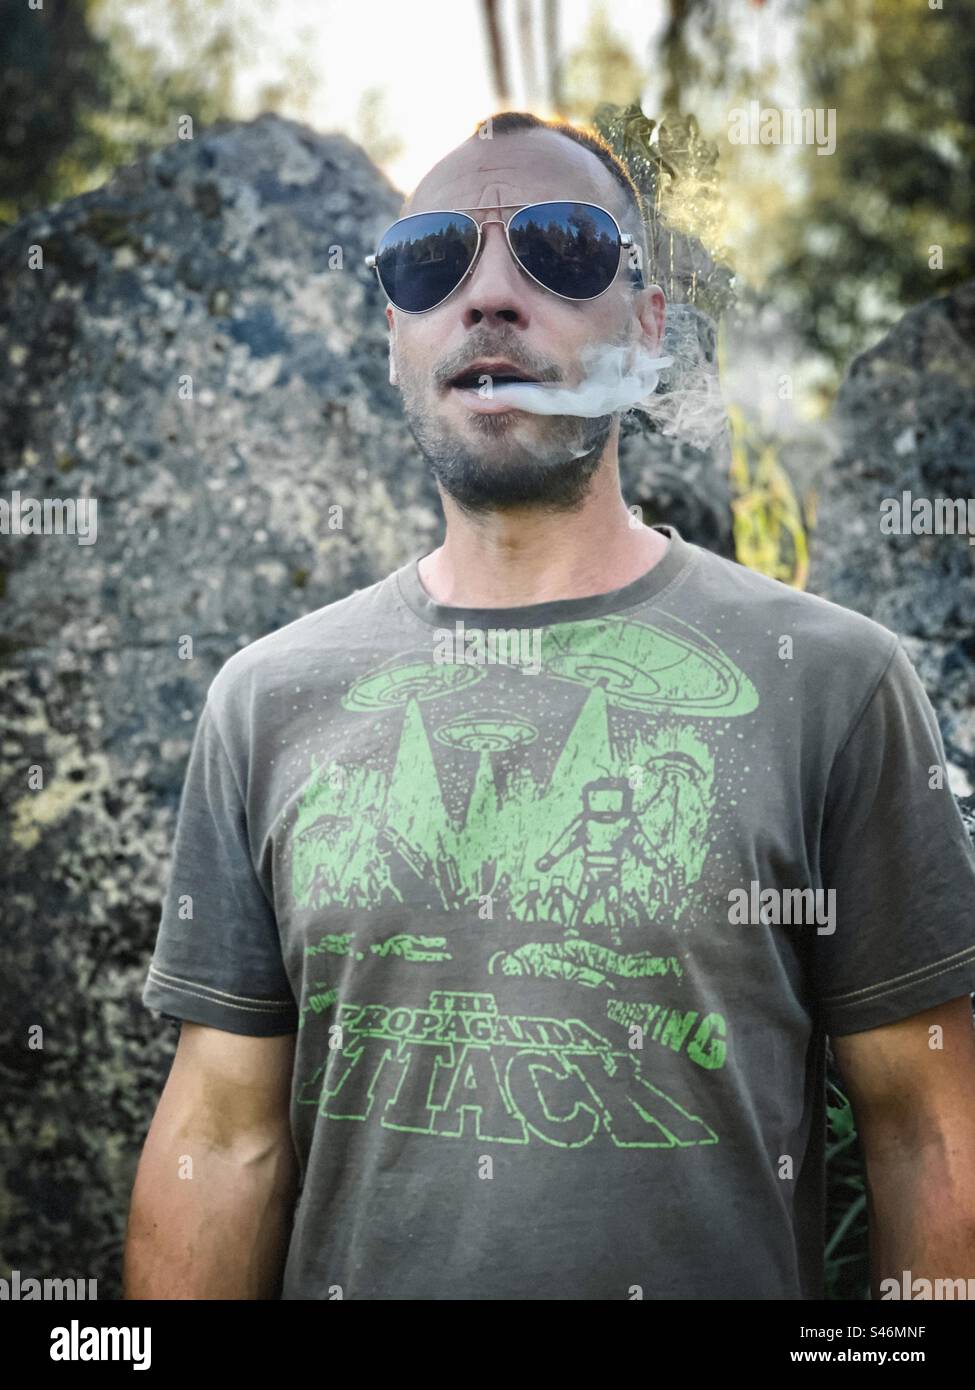 Man in sci-fi T-shirt and shades exhaling smoke Stock Photo